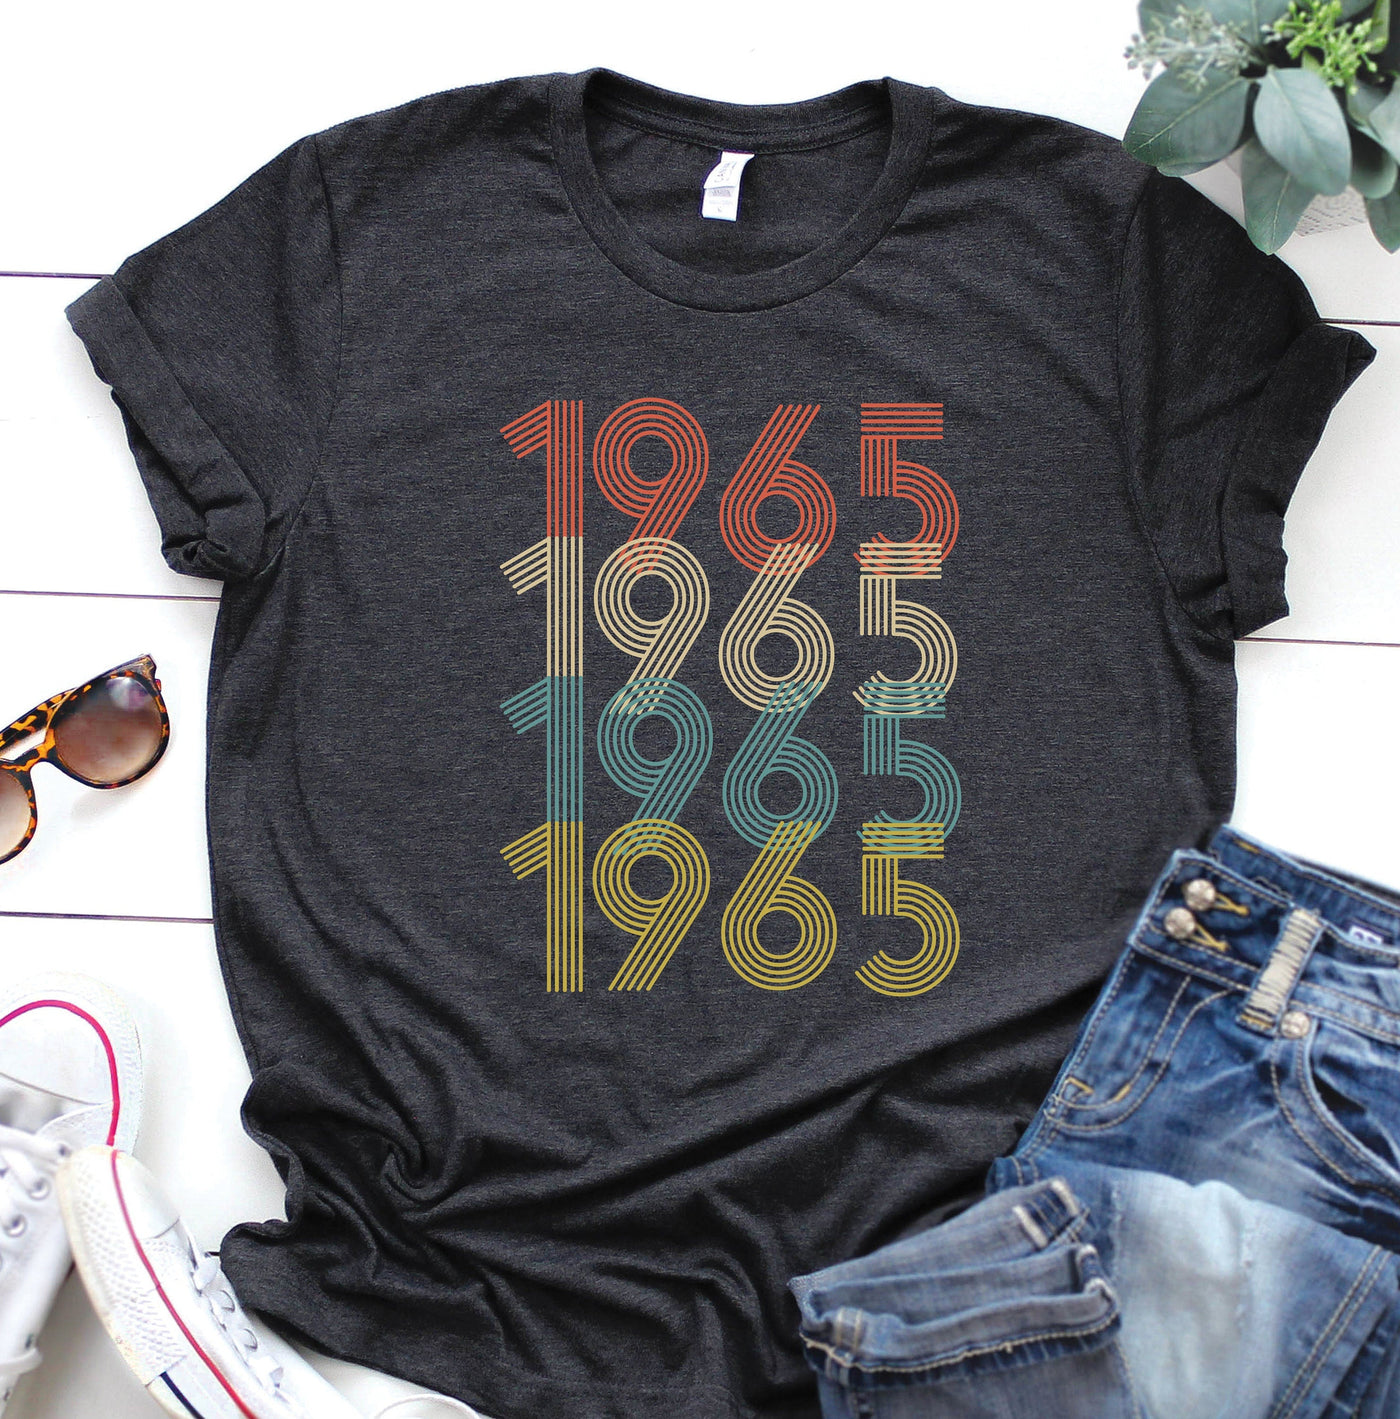 Vintage 1965 Shirt, 57th Birthday, gift for her